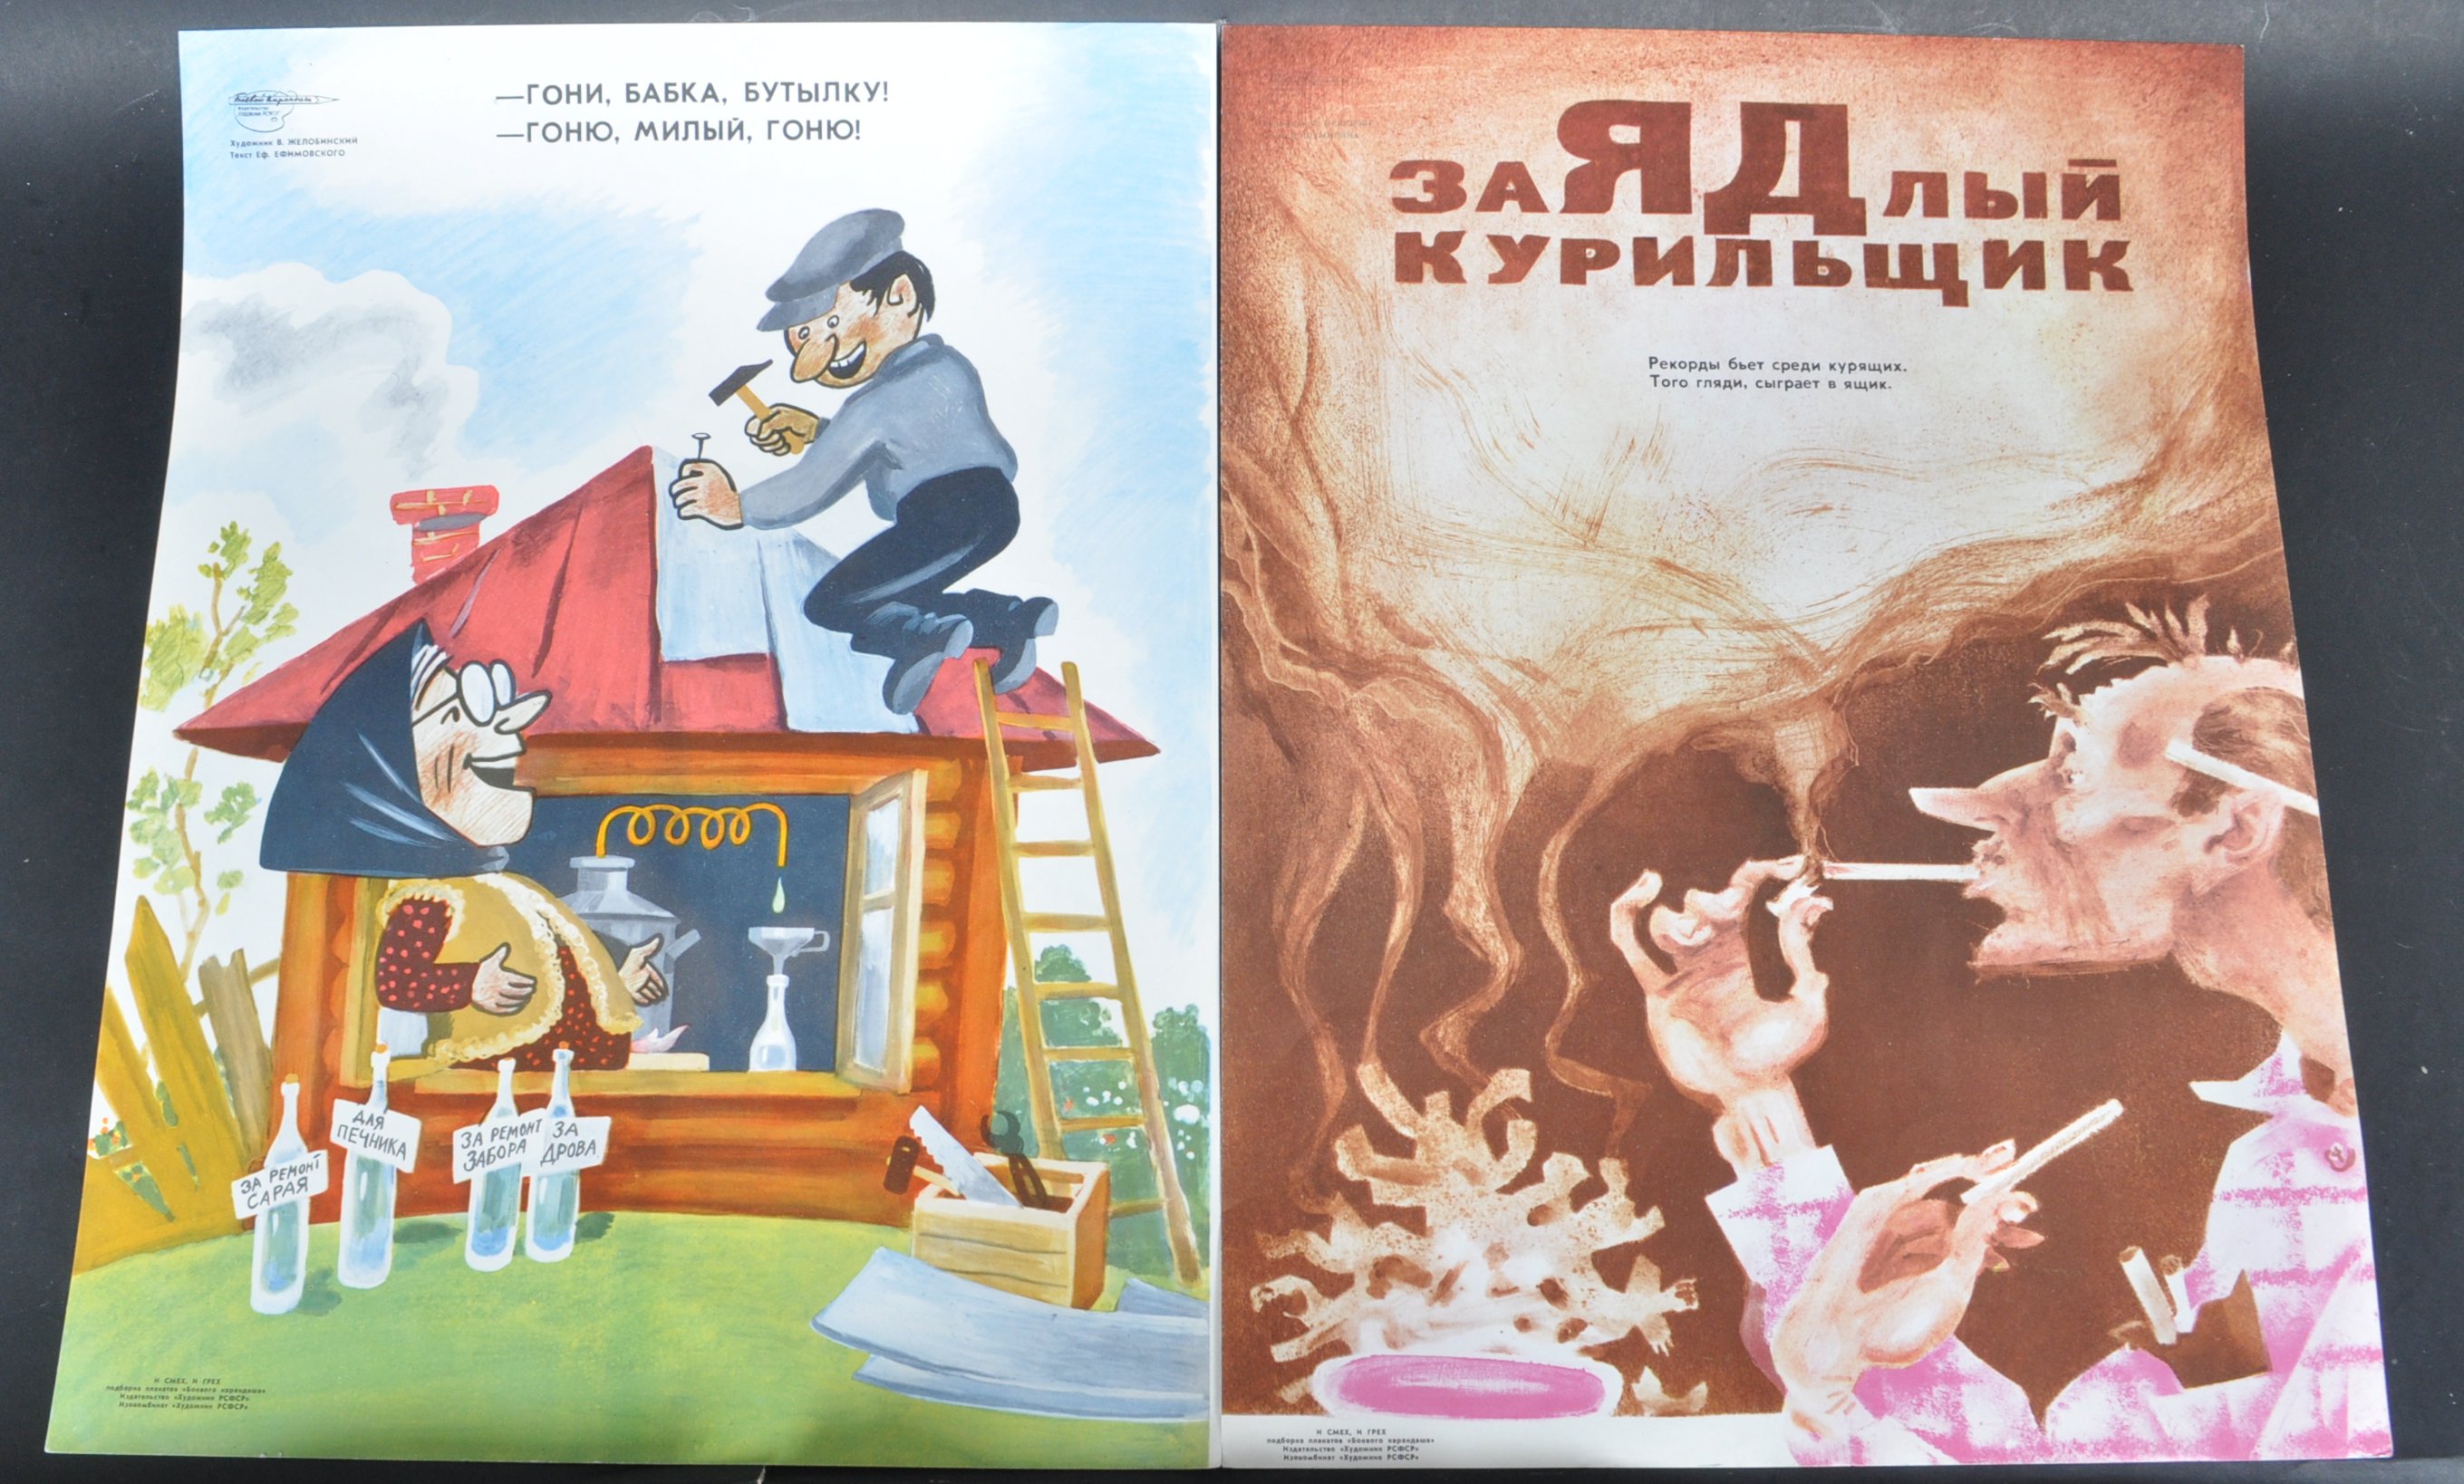 SET OF FOUR SOVIET COMMUNIST PARTY PROPAGANDA POSTERS - Image 3 of 3